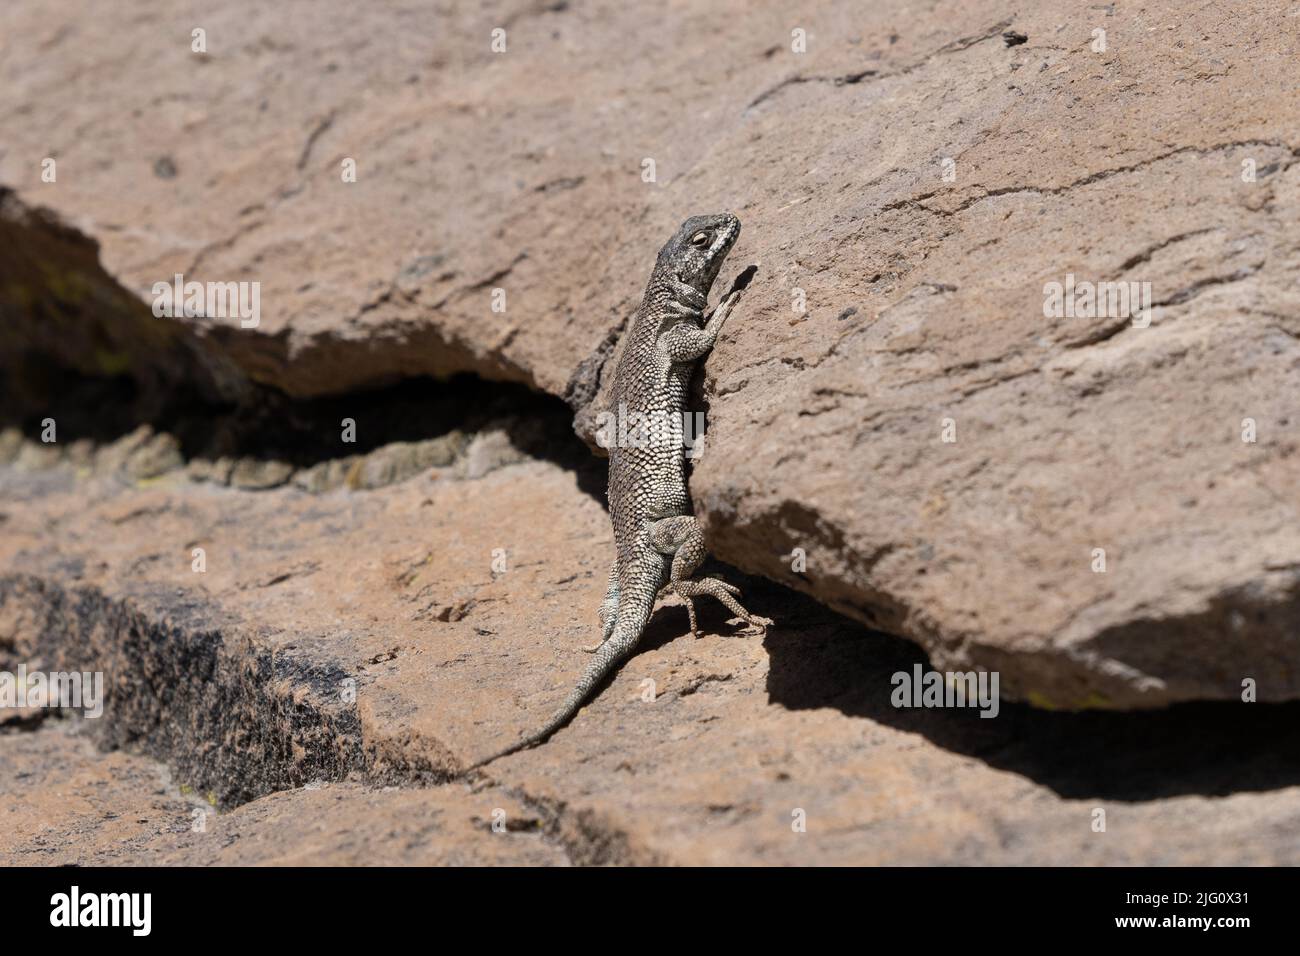 A Tarapaca Smooth-throated Lizard, Liolaemus jamesi, basking on a rock in the altiplano in Lauca National Park in Chile. Stock Photo